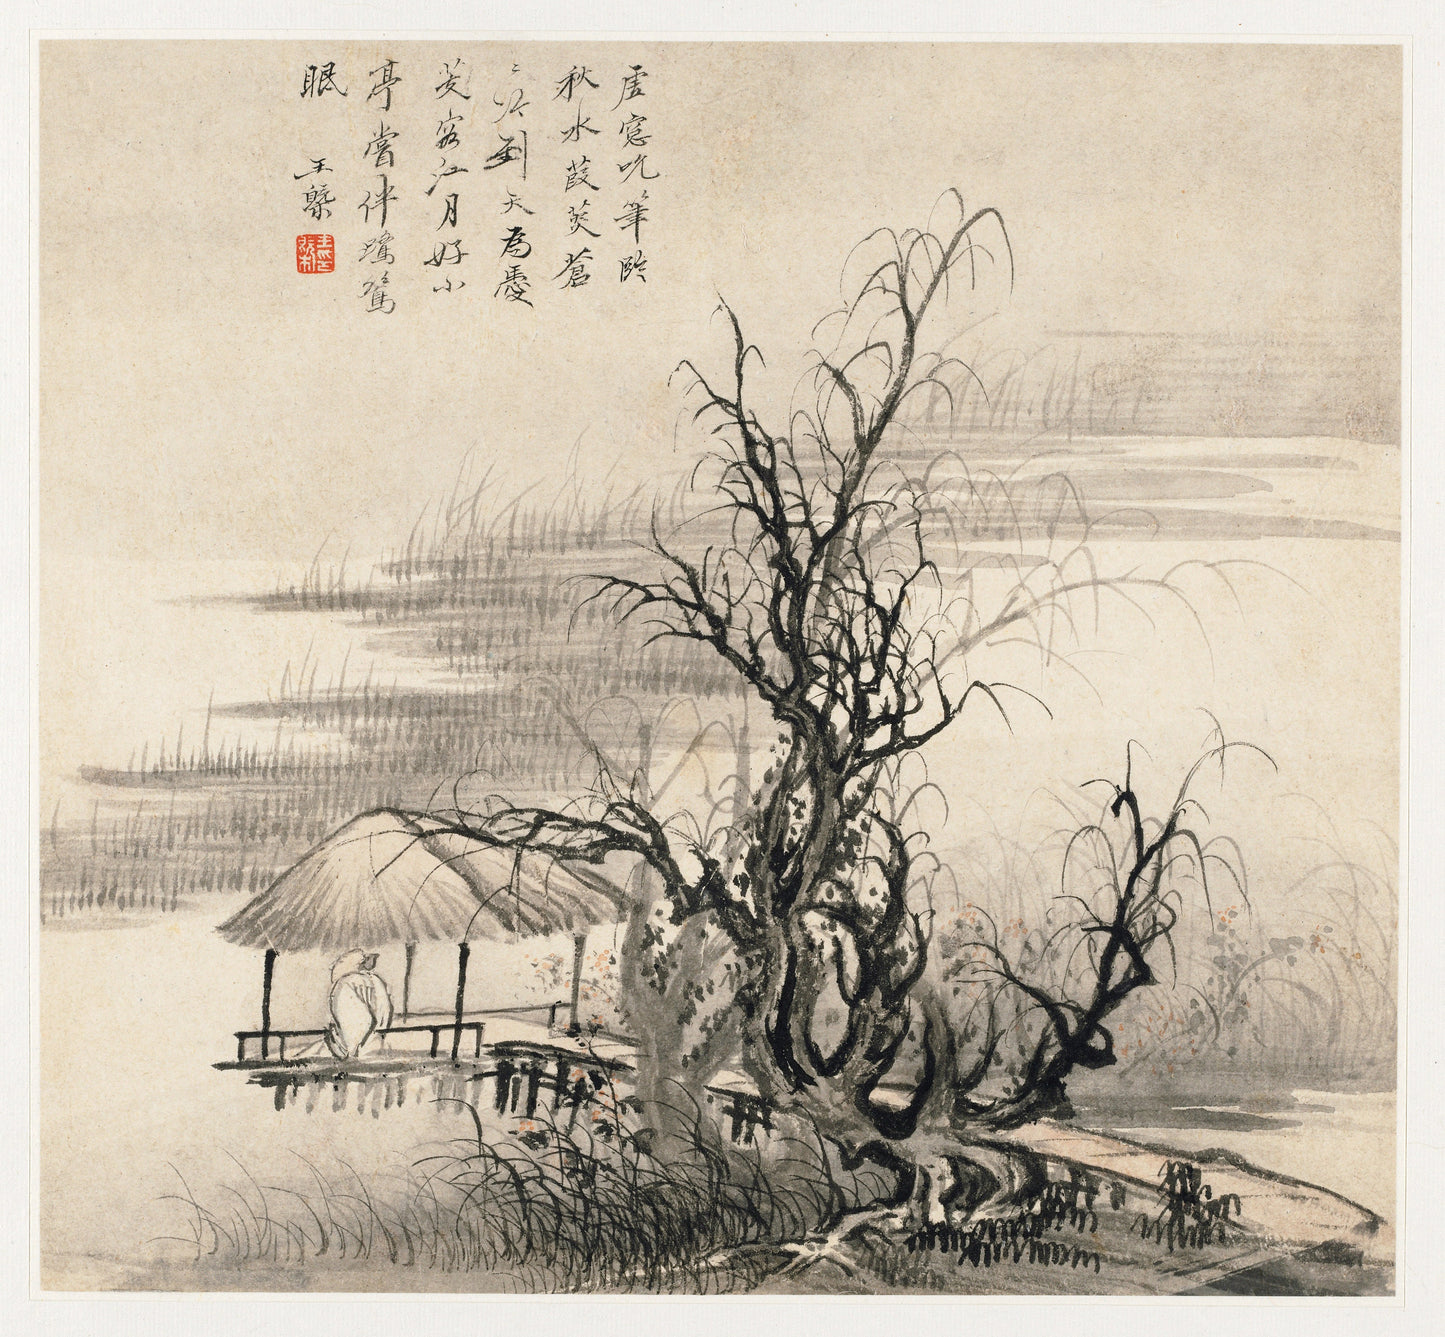 Wang Gai Chinese Landscape Paintings [8 Images]